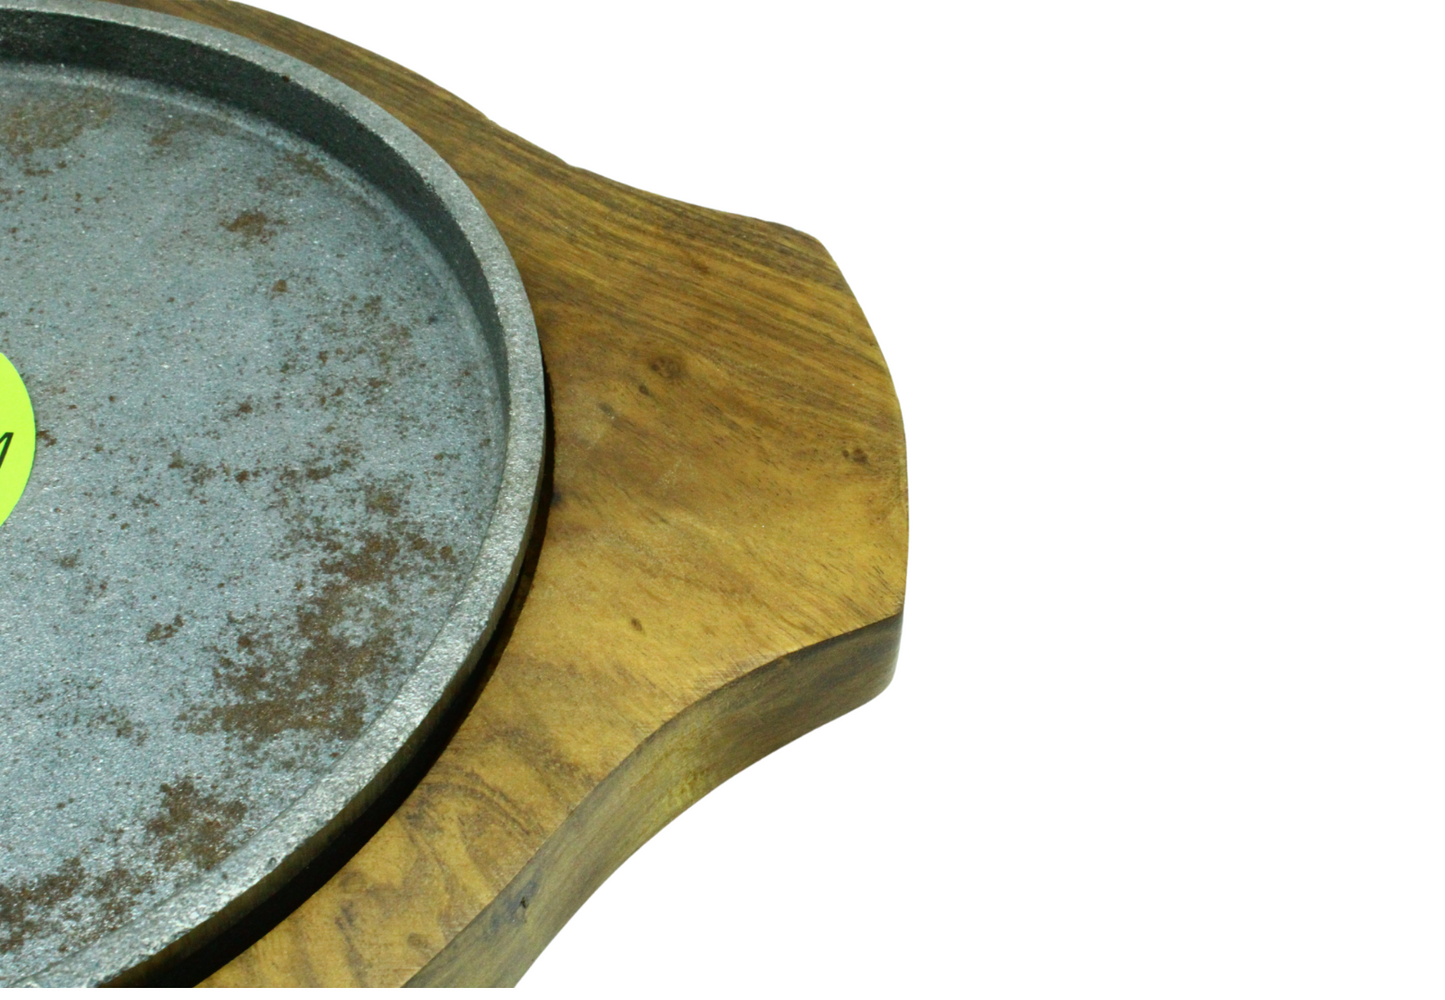 Cast Iron Sizzler Plate With Wooden Base | 8 inches | 1.58 KG TRILONIUM | Cast Iron Cookware